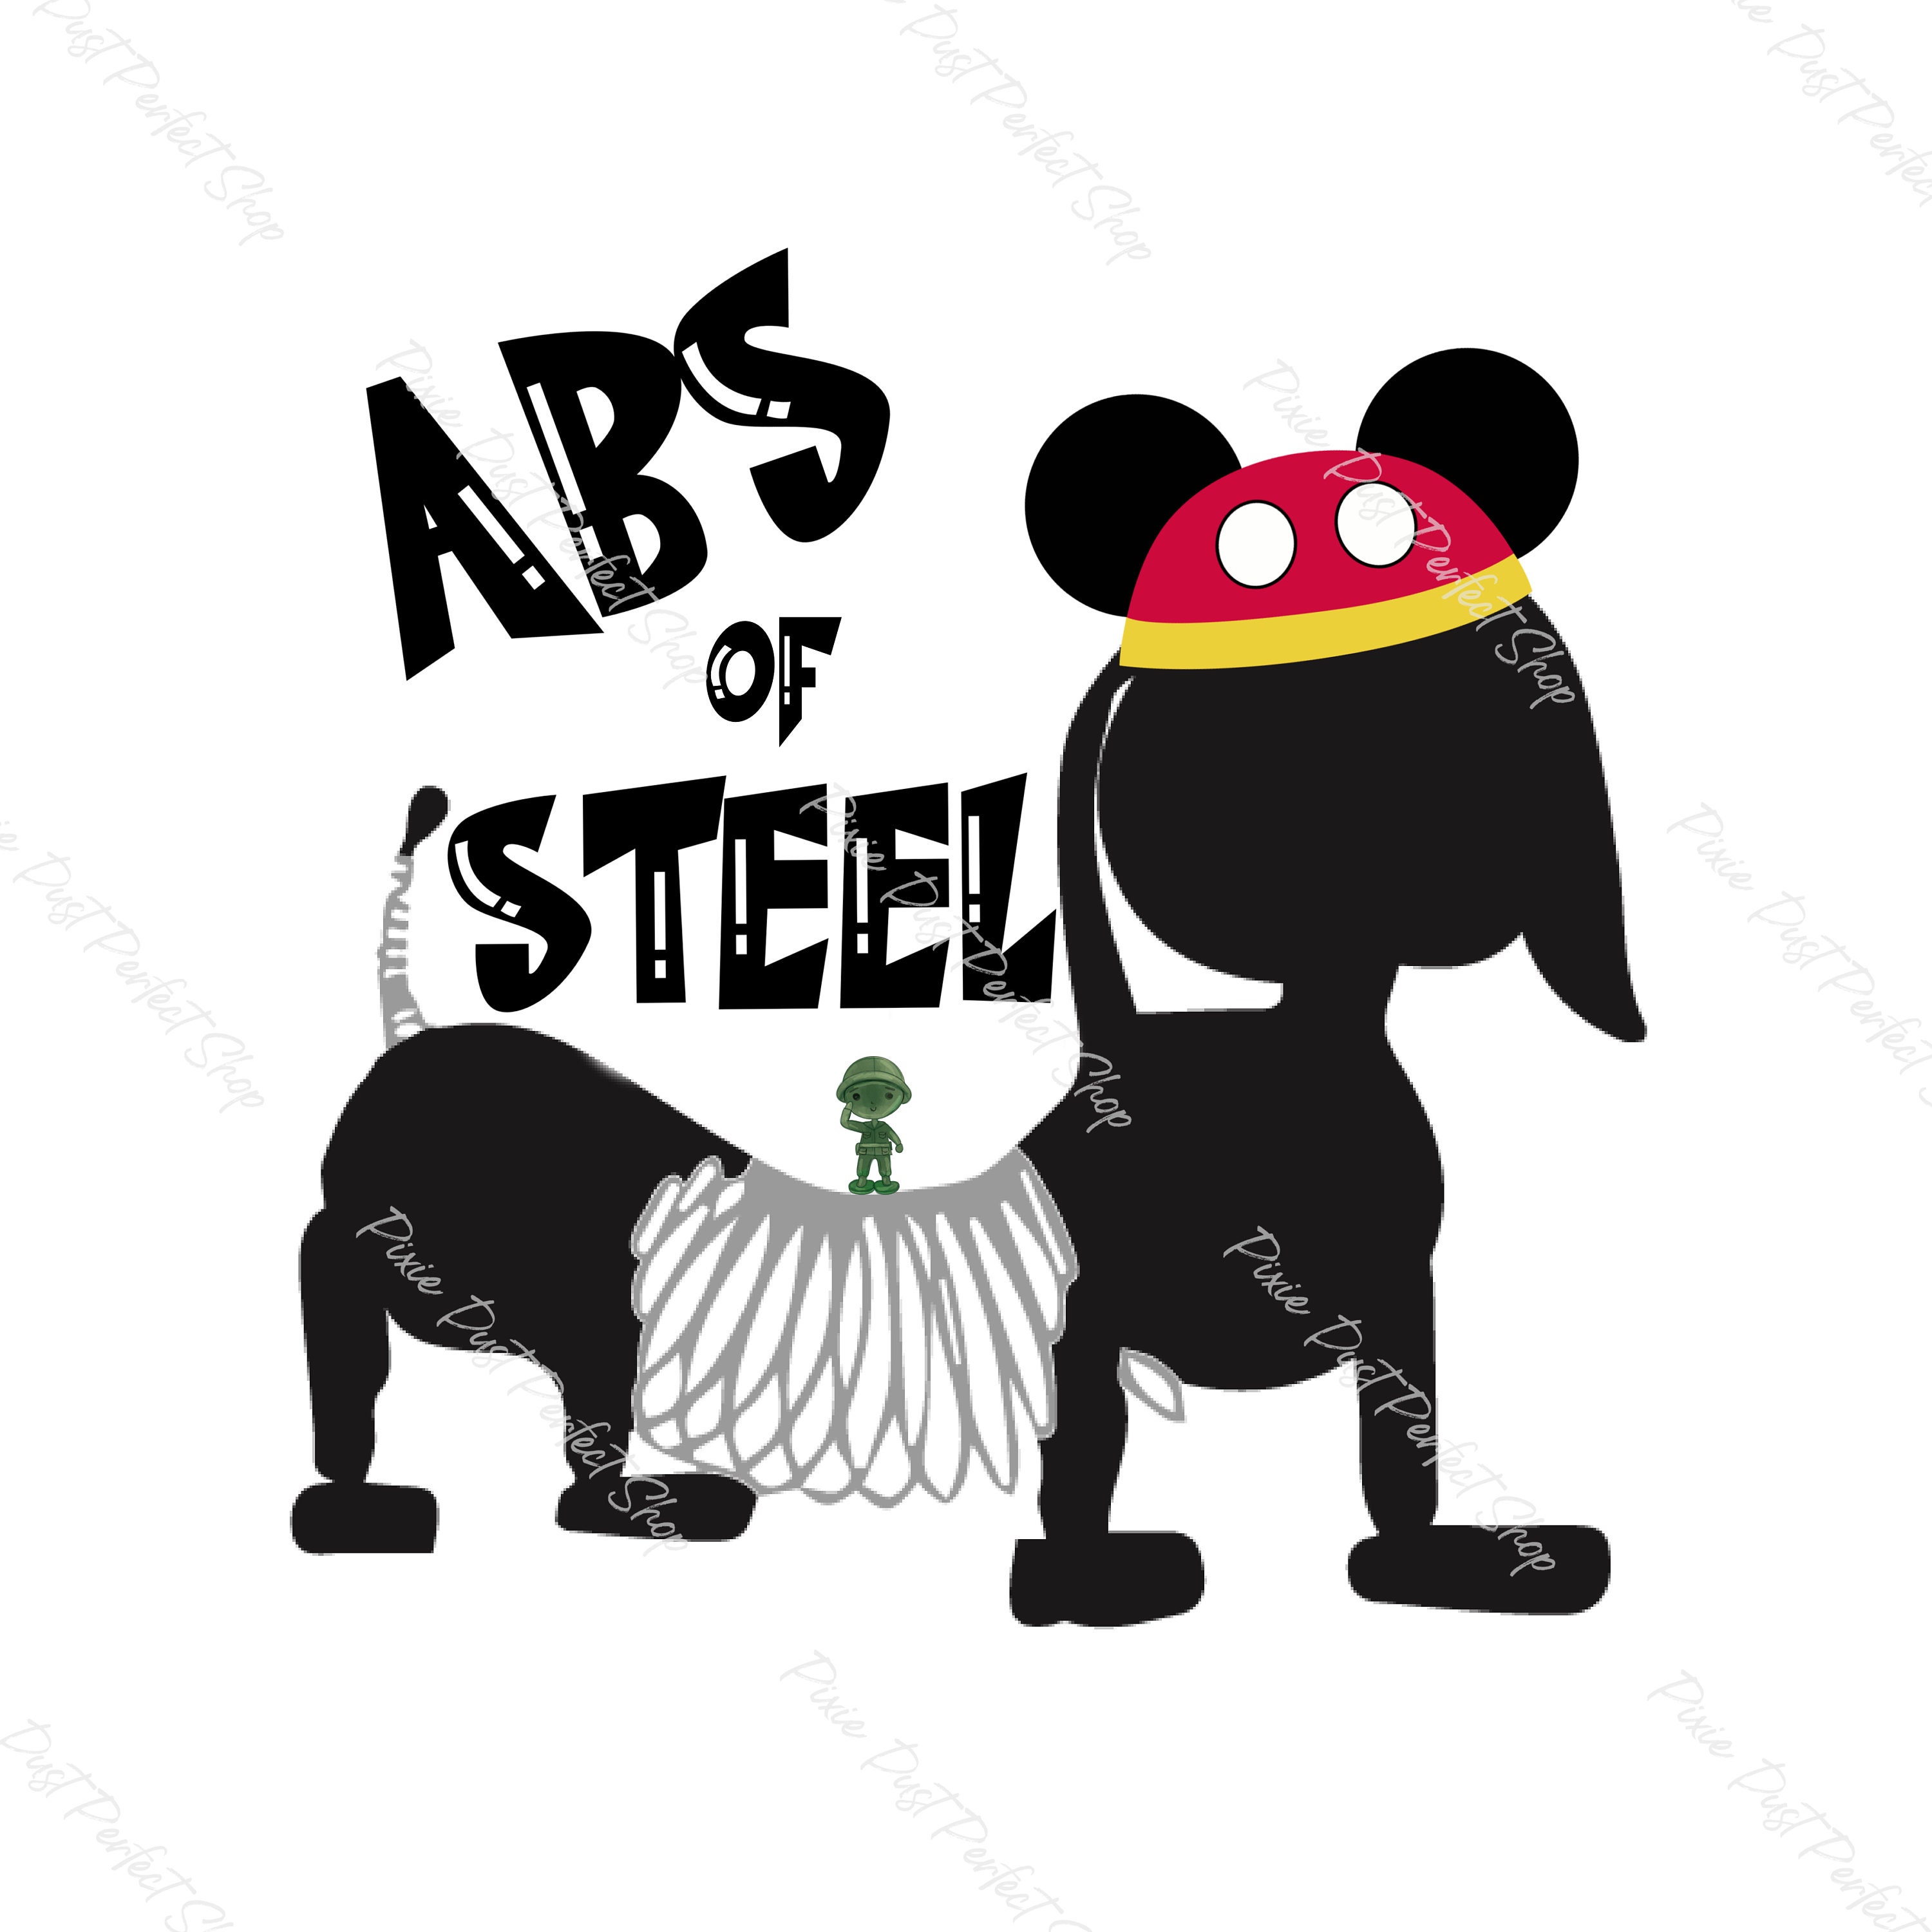 Fake Abs (Six Pack ). Muscular body. Abdominal Muscles. Cut files for  Cricut. Clip Art silhouettes (eps, svg, pdf, png, dxf, jpeg). - So Fontsy